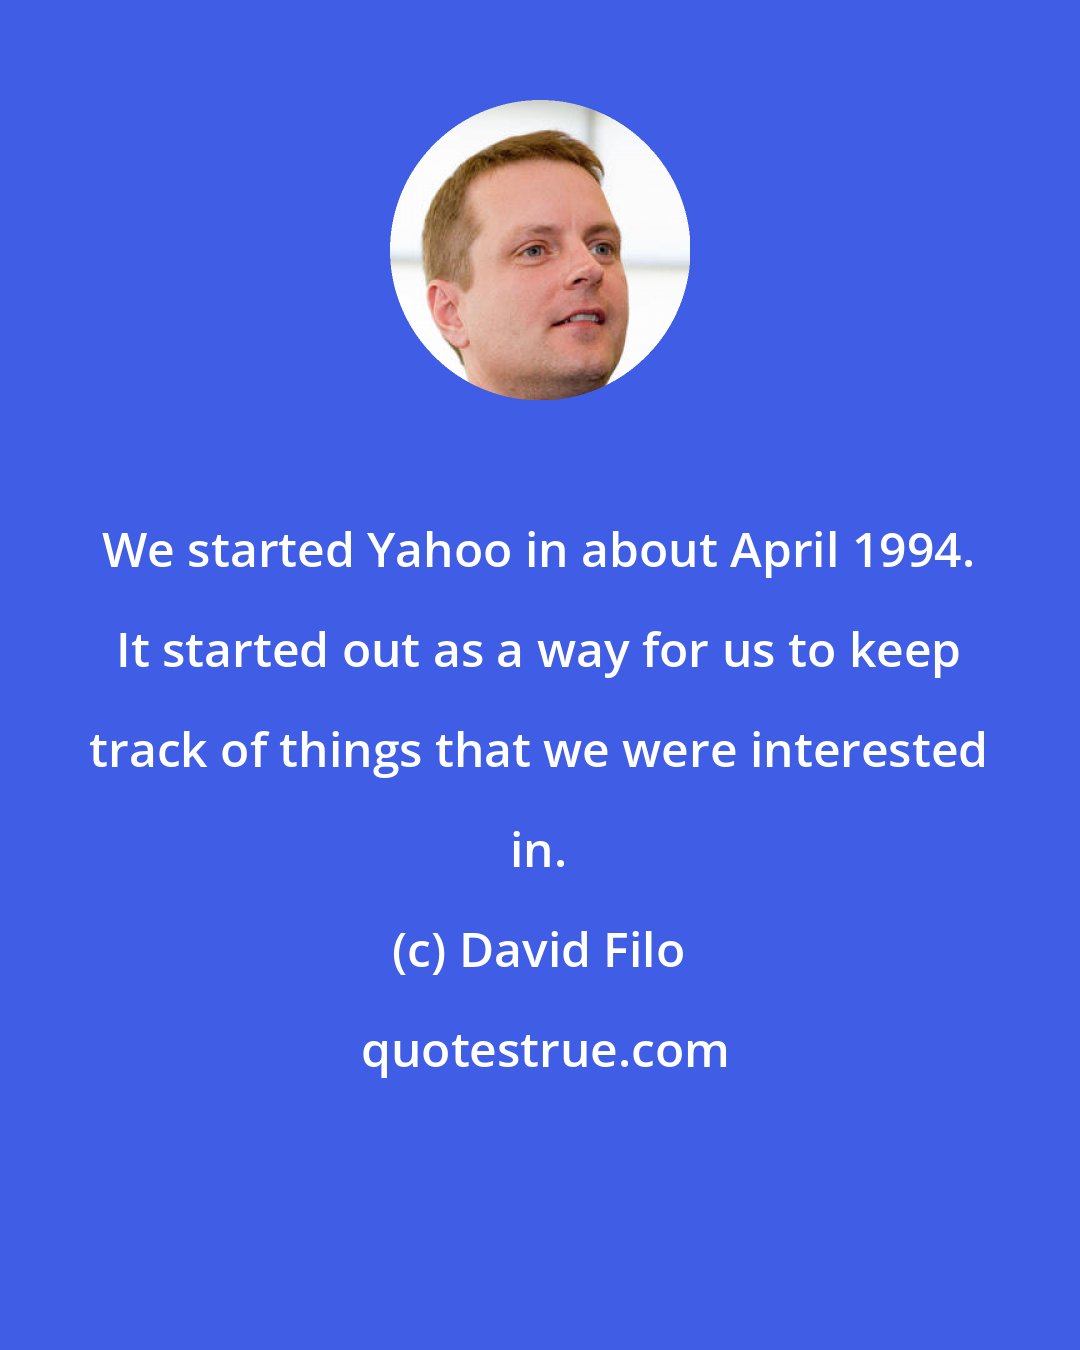 David Filo: We started Yahoo in about April 1994. It started out as a way for us to keep track of things that we were interested in.